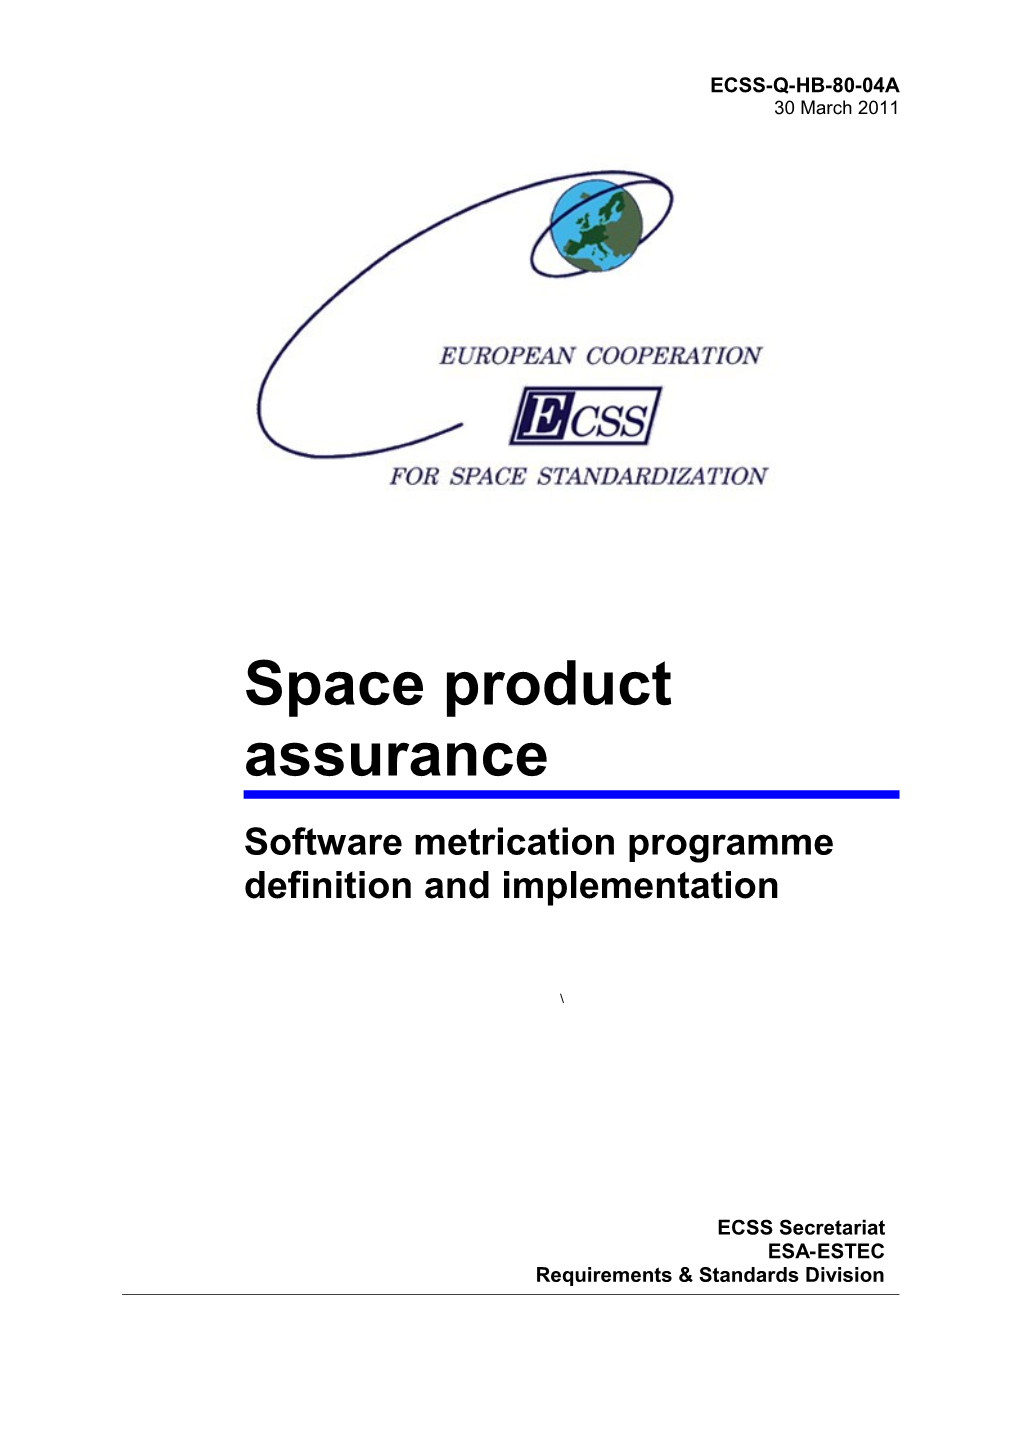 Space Product Assurance